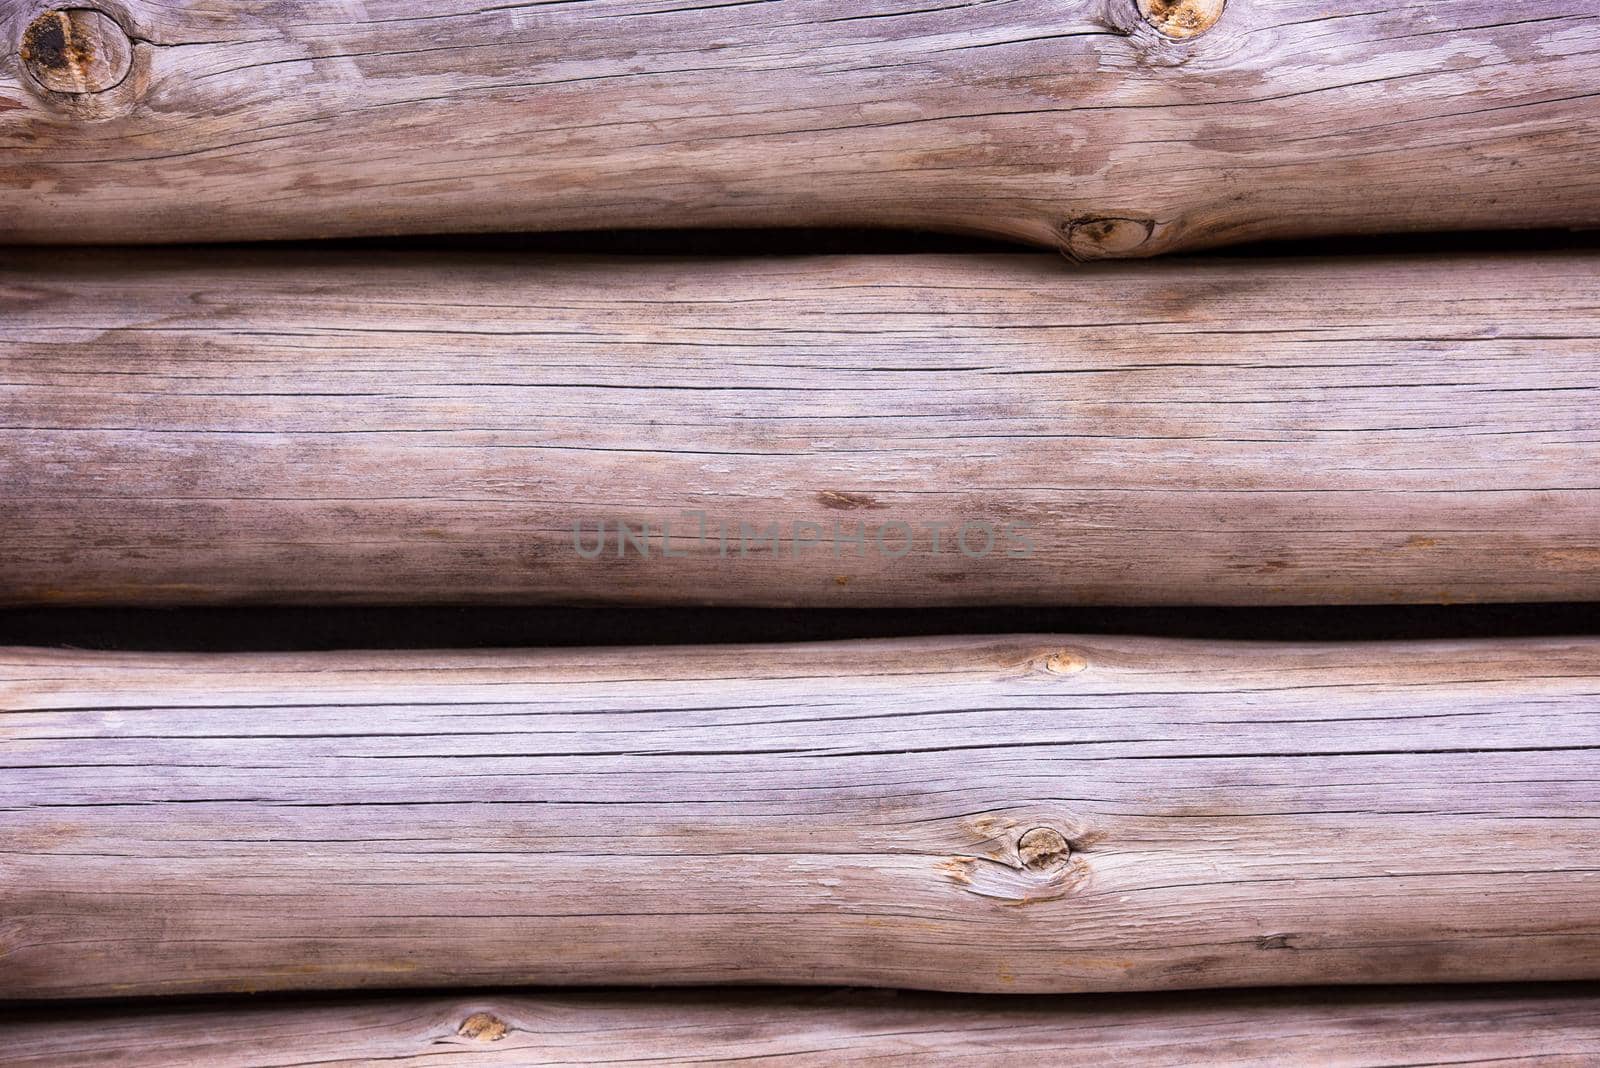 close up of old wooden wall background or texture